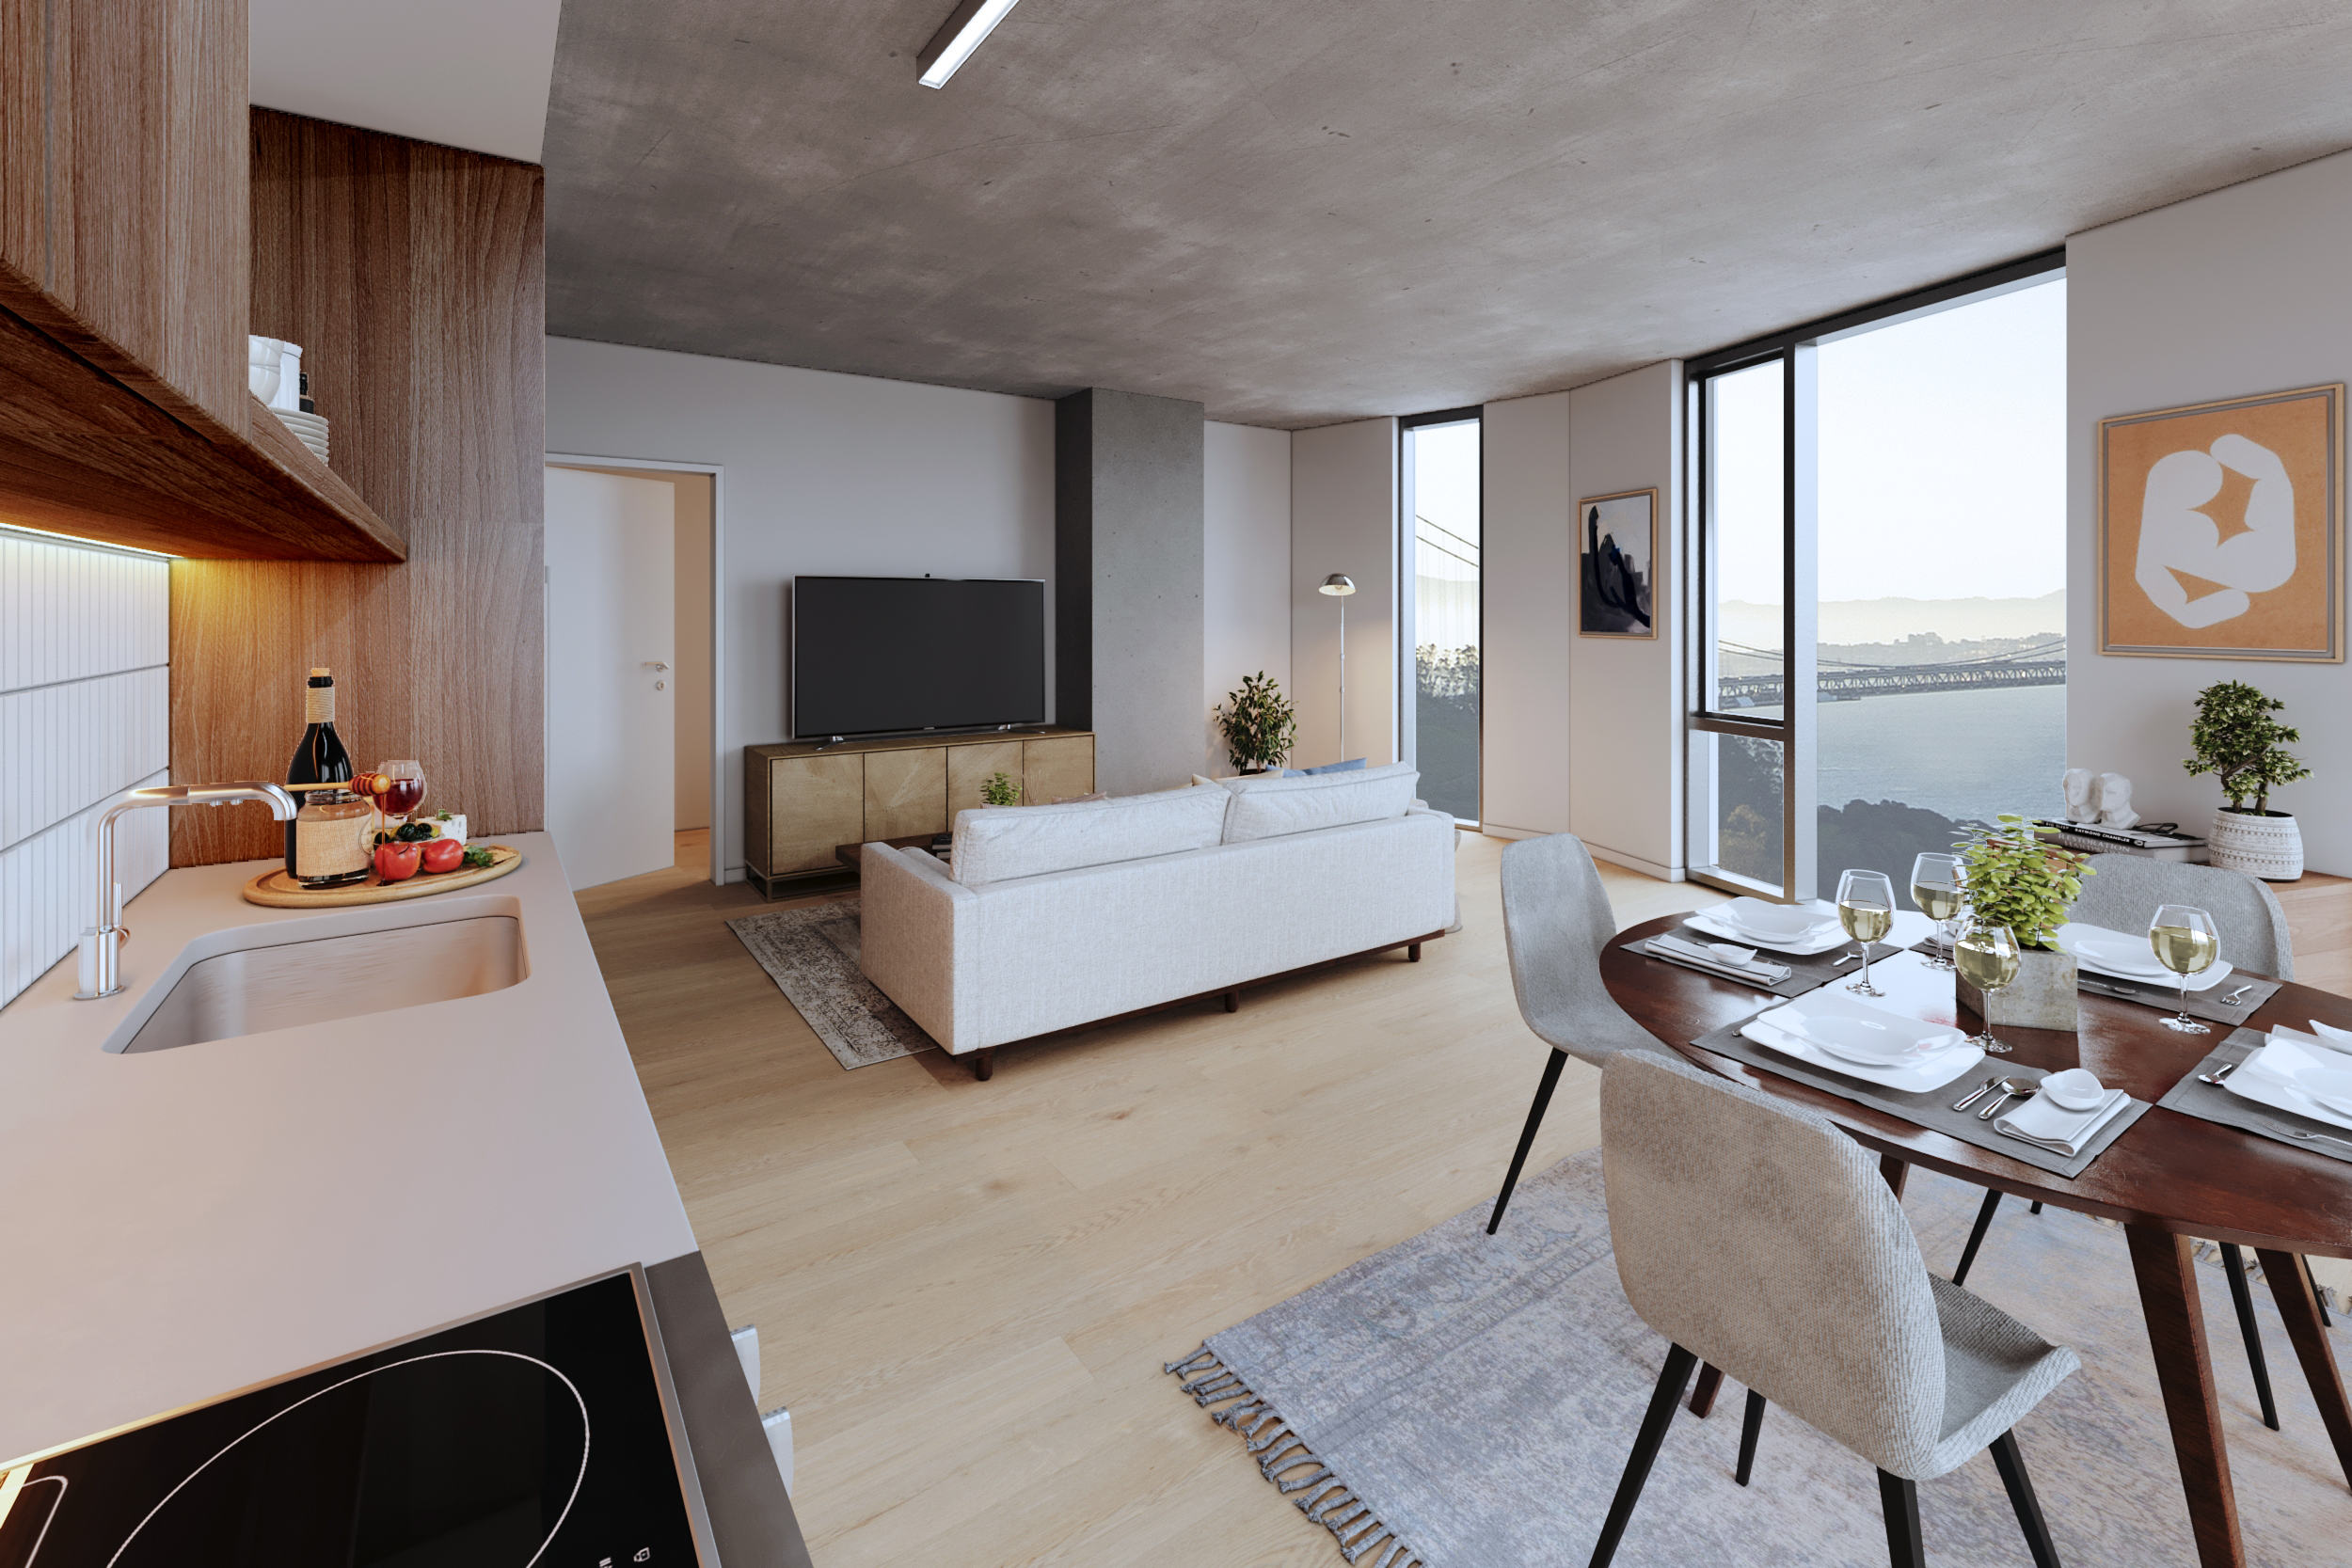 Rendering of a unit living room and kitchen with the view of the bay for Tidal House in Treasure Island, San Francisco, Ca.